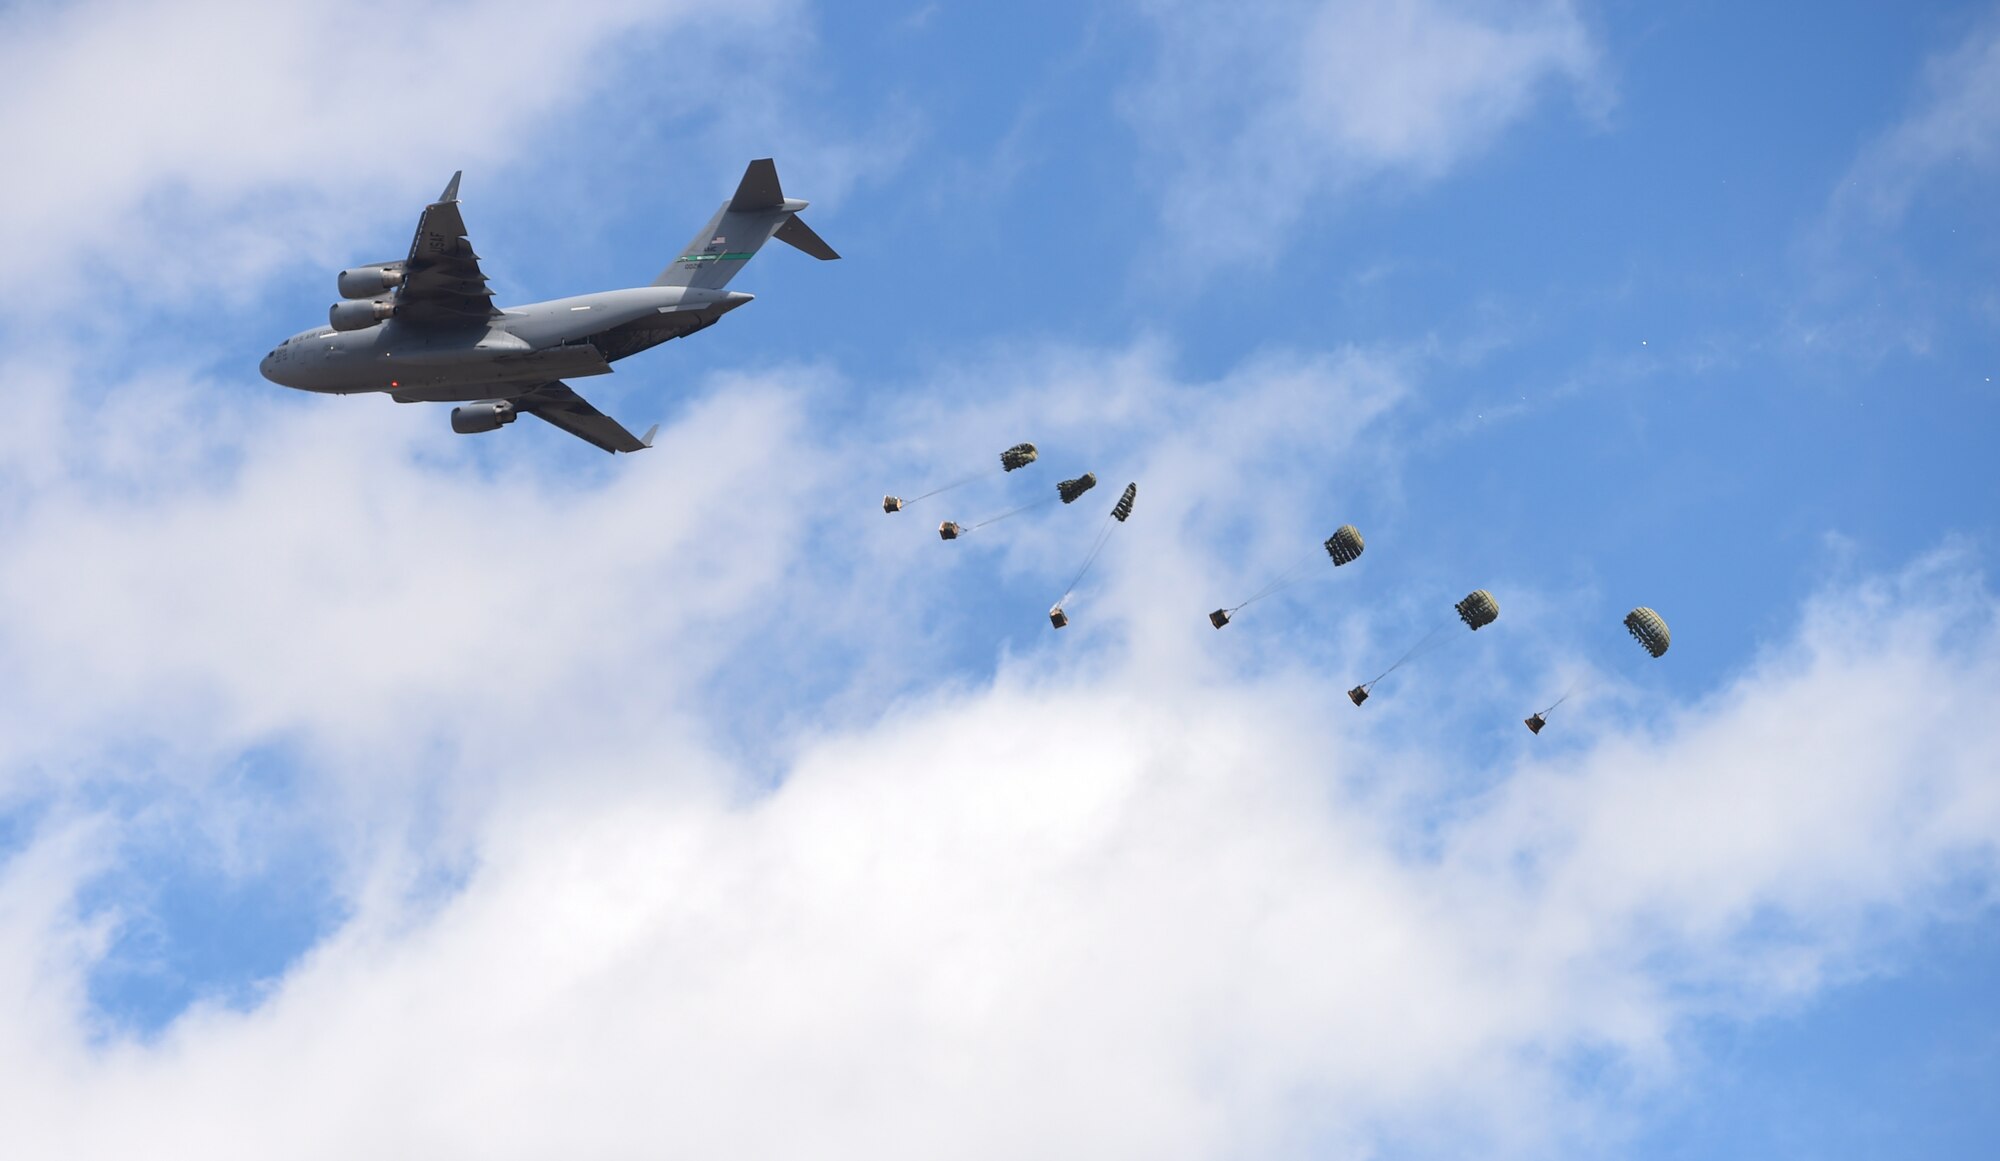 A McChord C-17 Globemaster III conducts an air drop during the Joint Base Lewis-McChord Airshow and Warrior Expo Aug. 27, 2016, at JBLM, Wash.  The C-17 demonstrated its capabilities for the crowd during both days of the air show along with countless other air craft performers. (U.S. Air Force photo/Staff Sgt. Naomi Shipley)